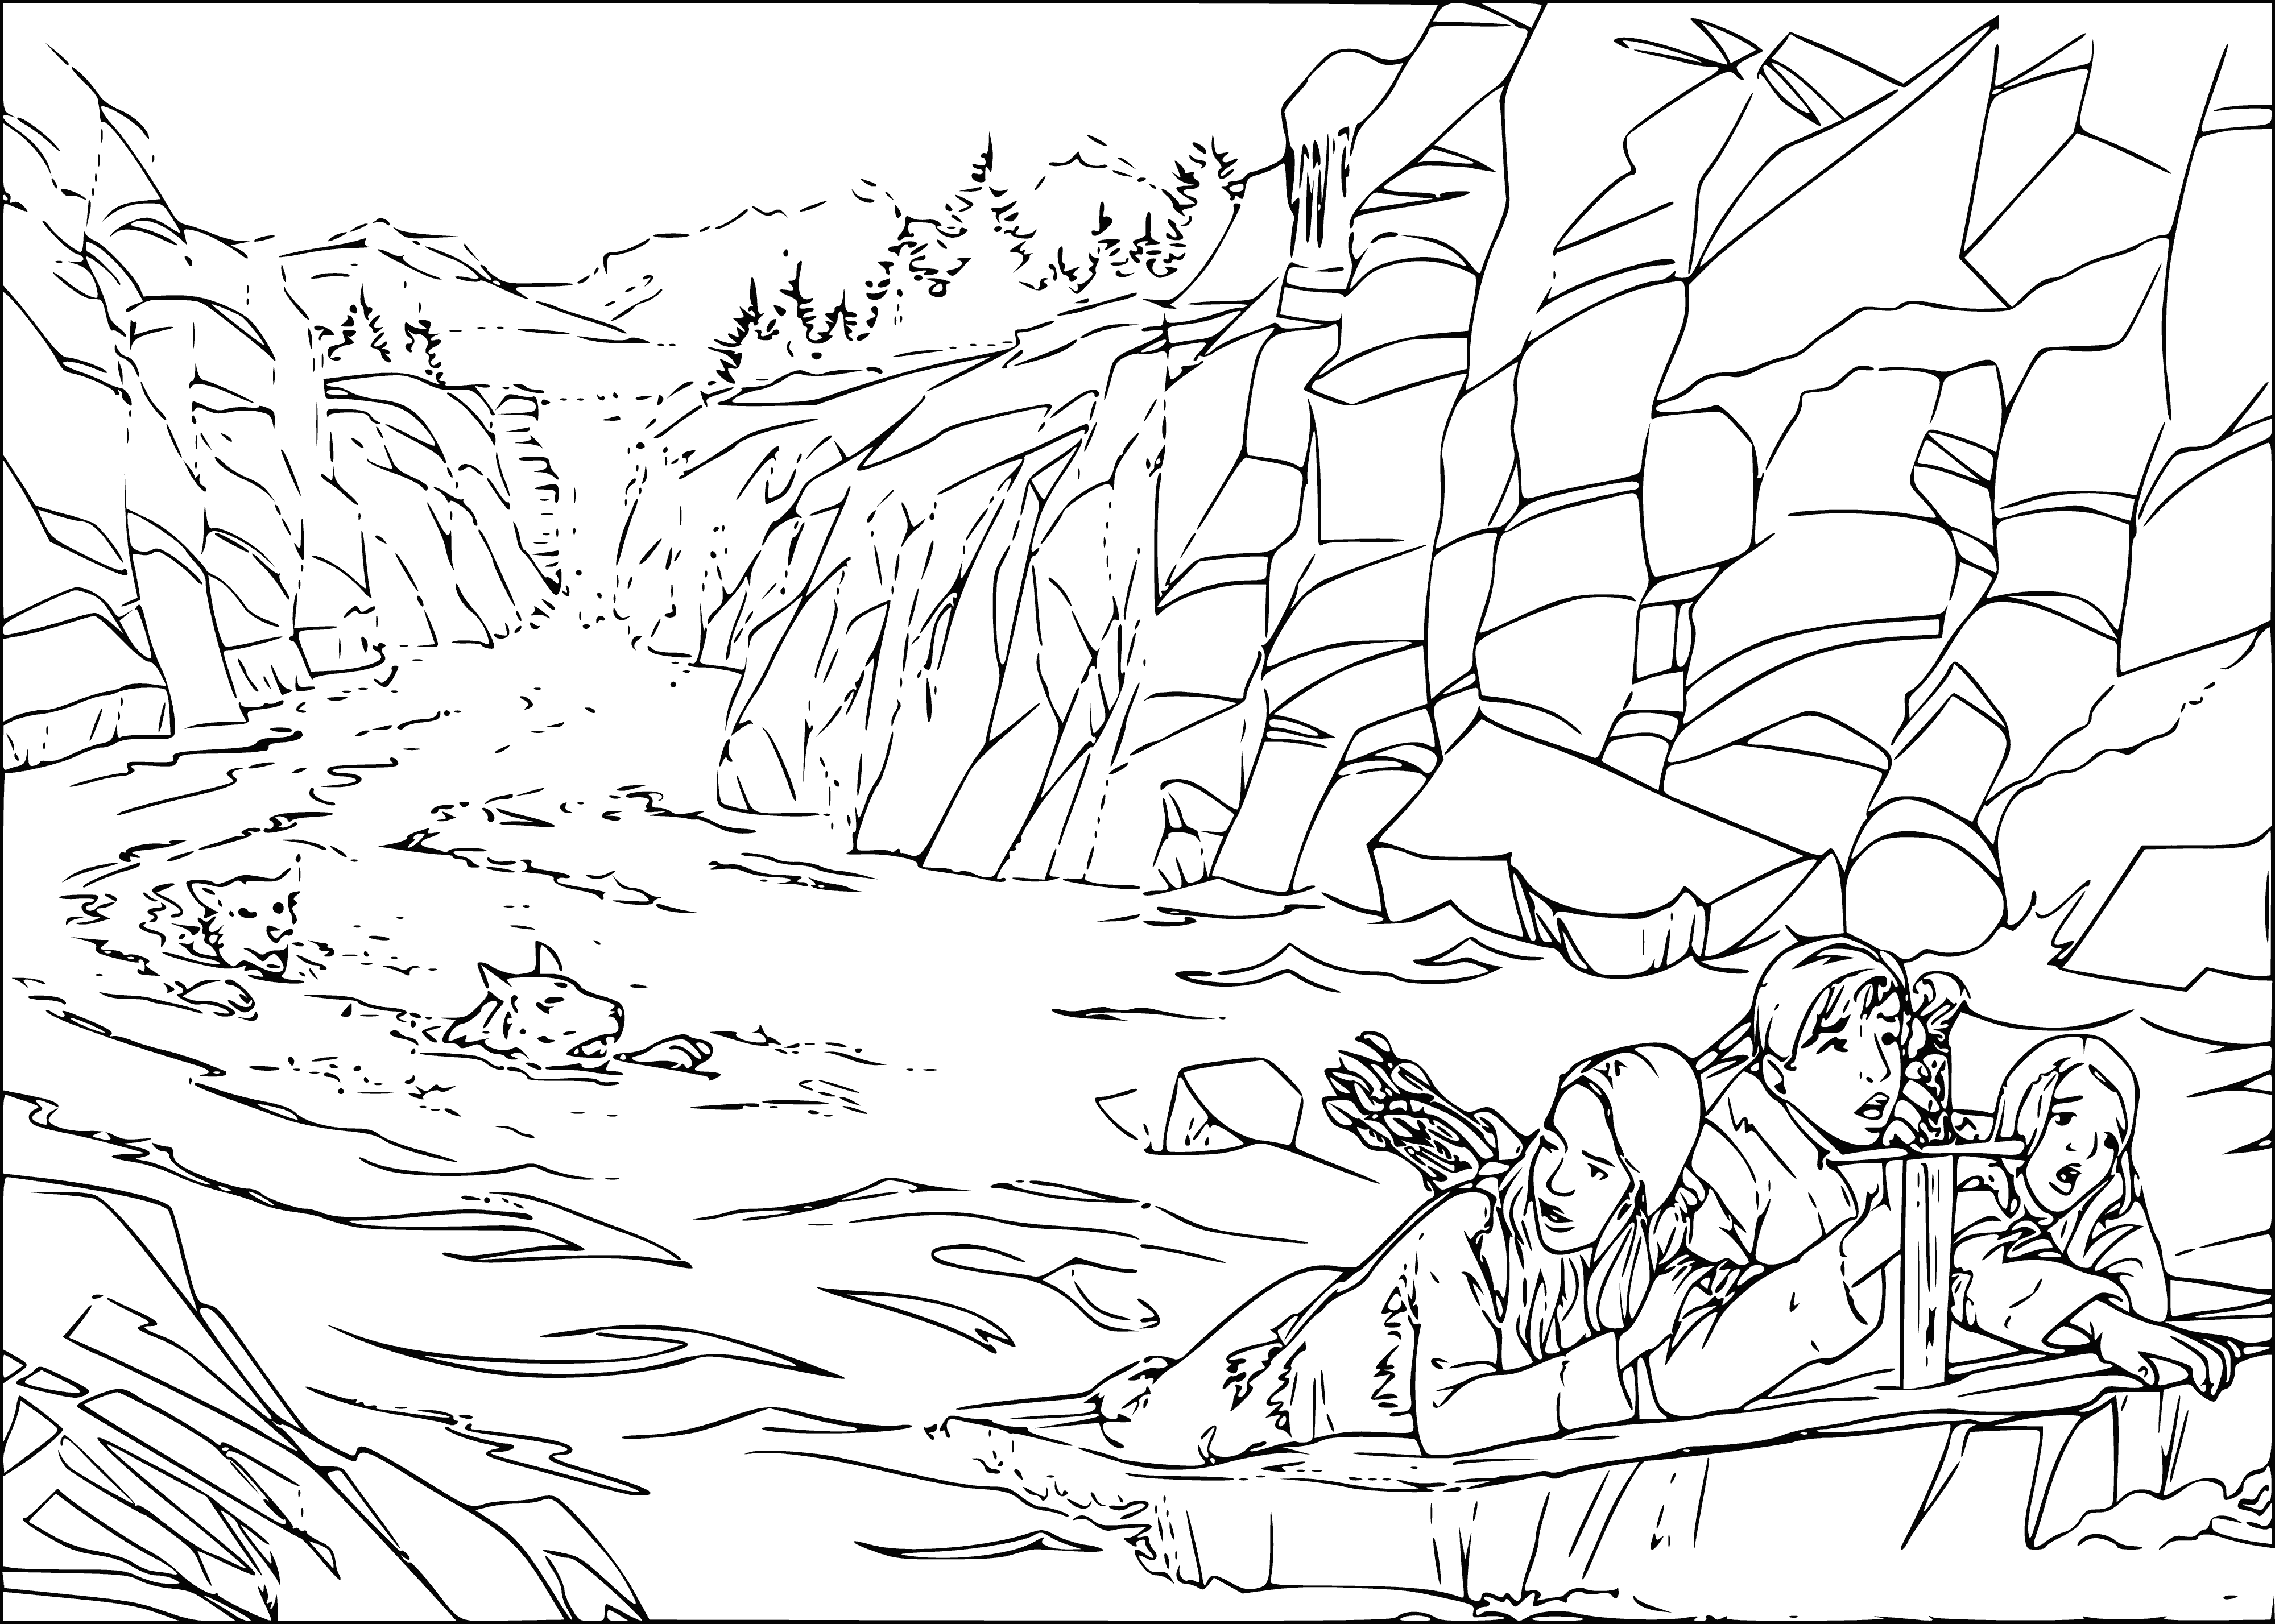 coloring page: Lion in snow, yellow eye, sword in ground, small figure in white robe wearing a crown kneels before lion.